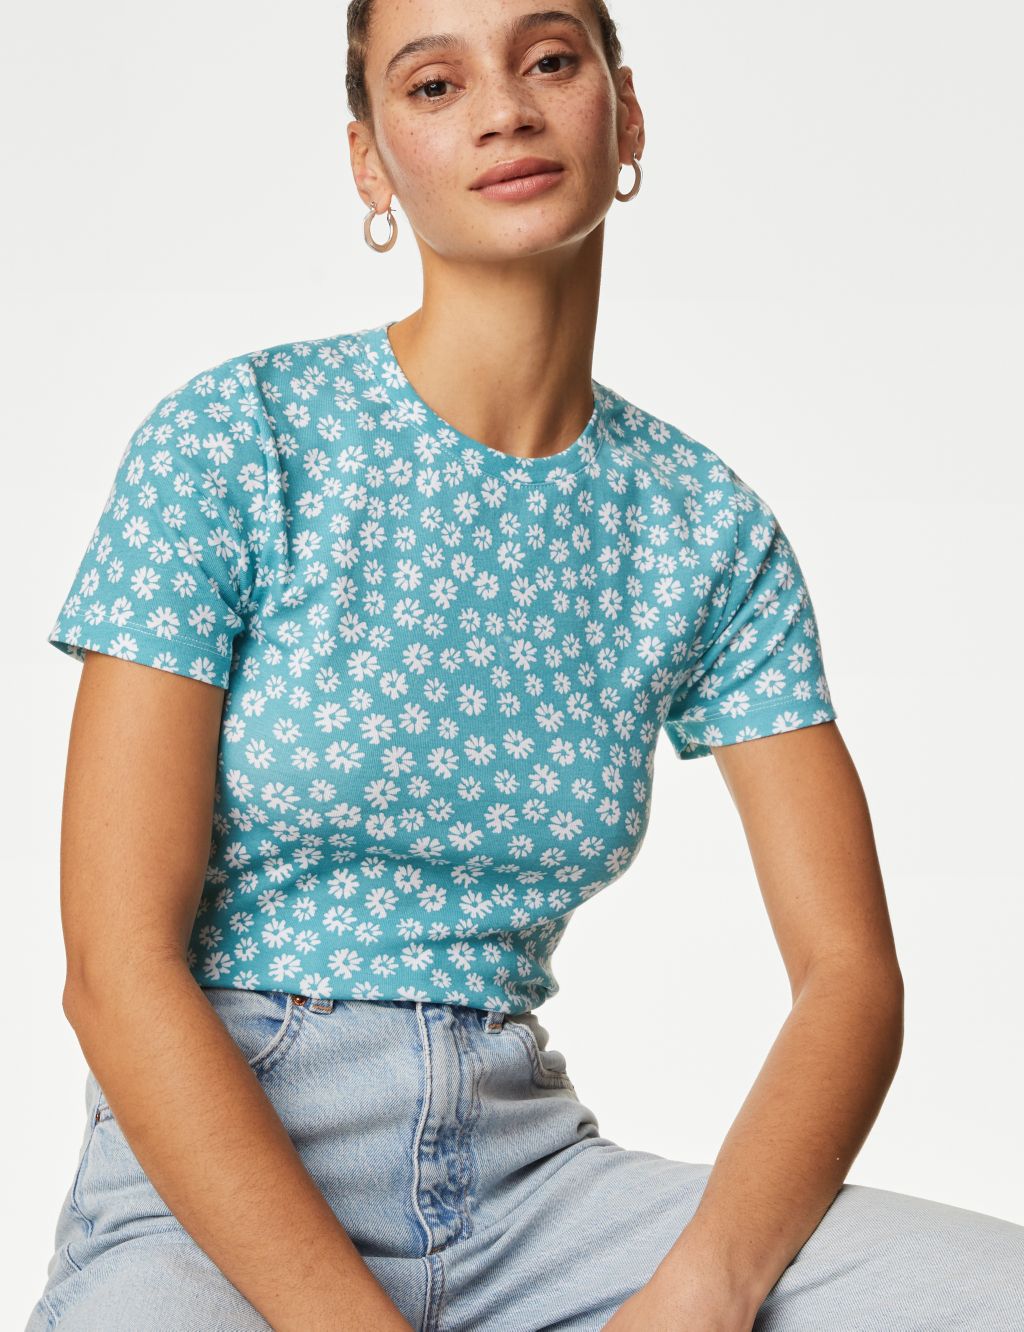 Women's New-In T-Shirts | M&S